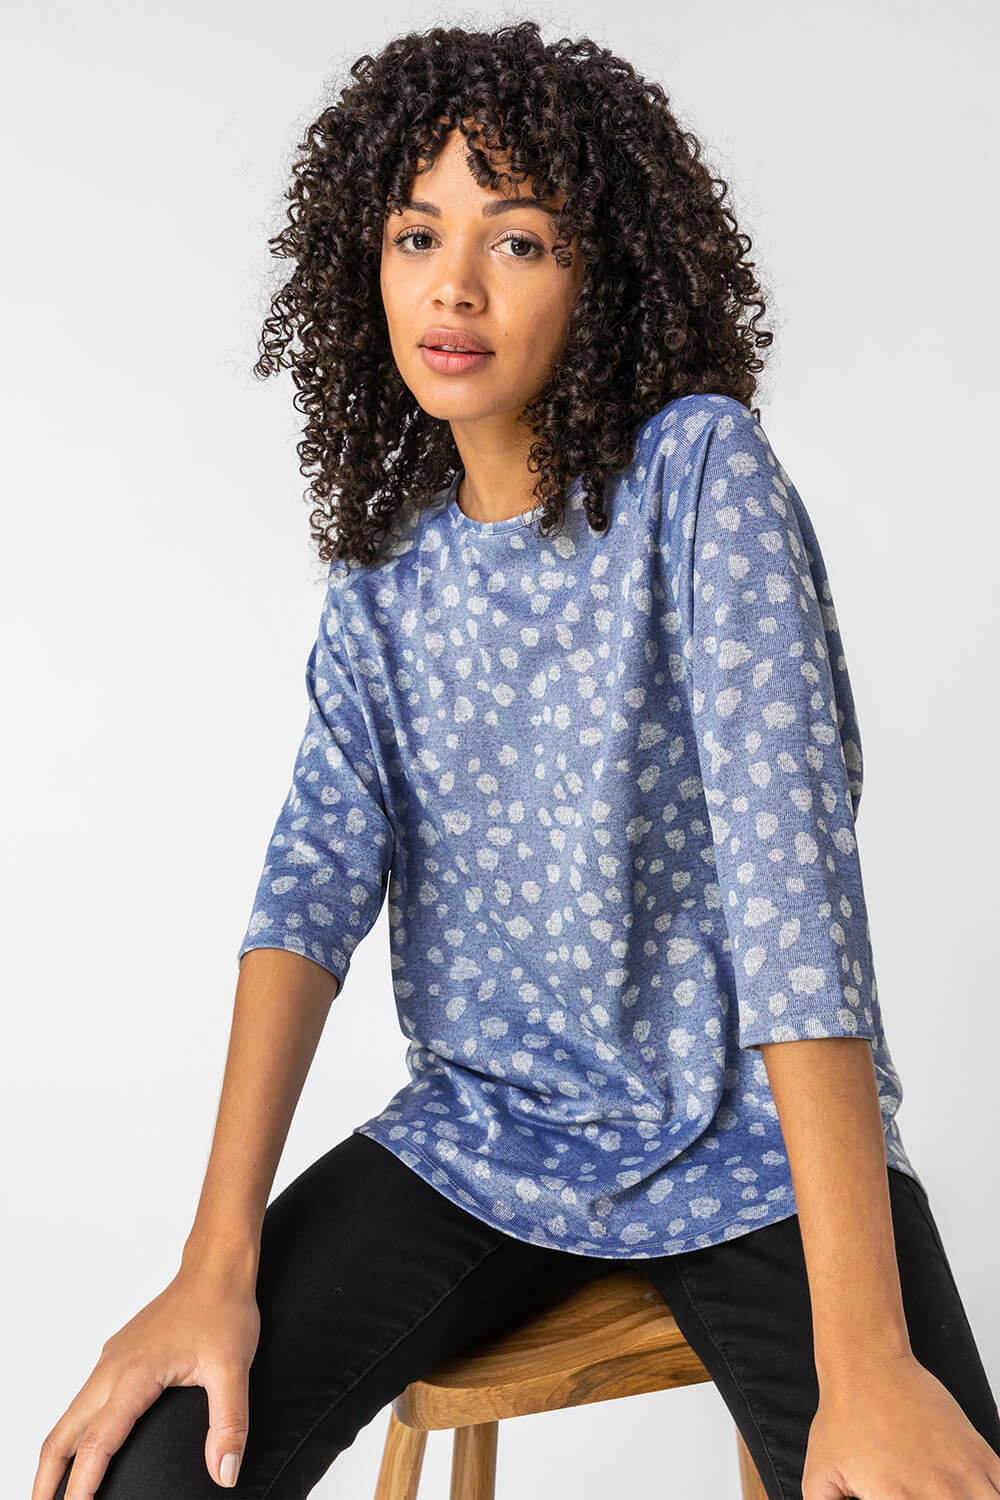 Blue Abstract Spot Print Jersey Top, Image 5 of 5